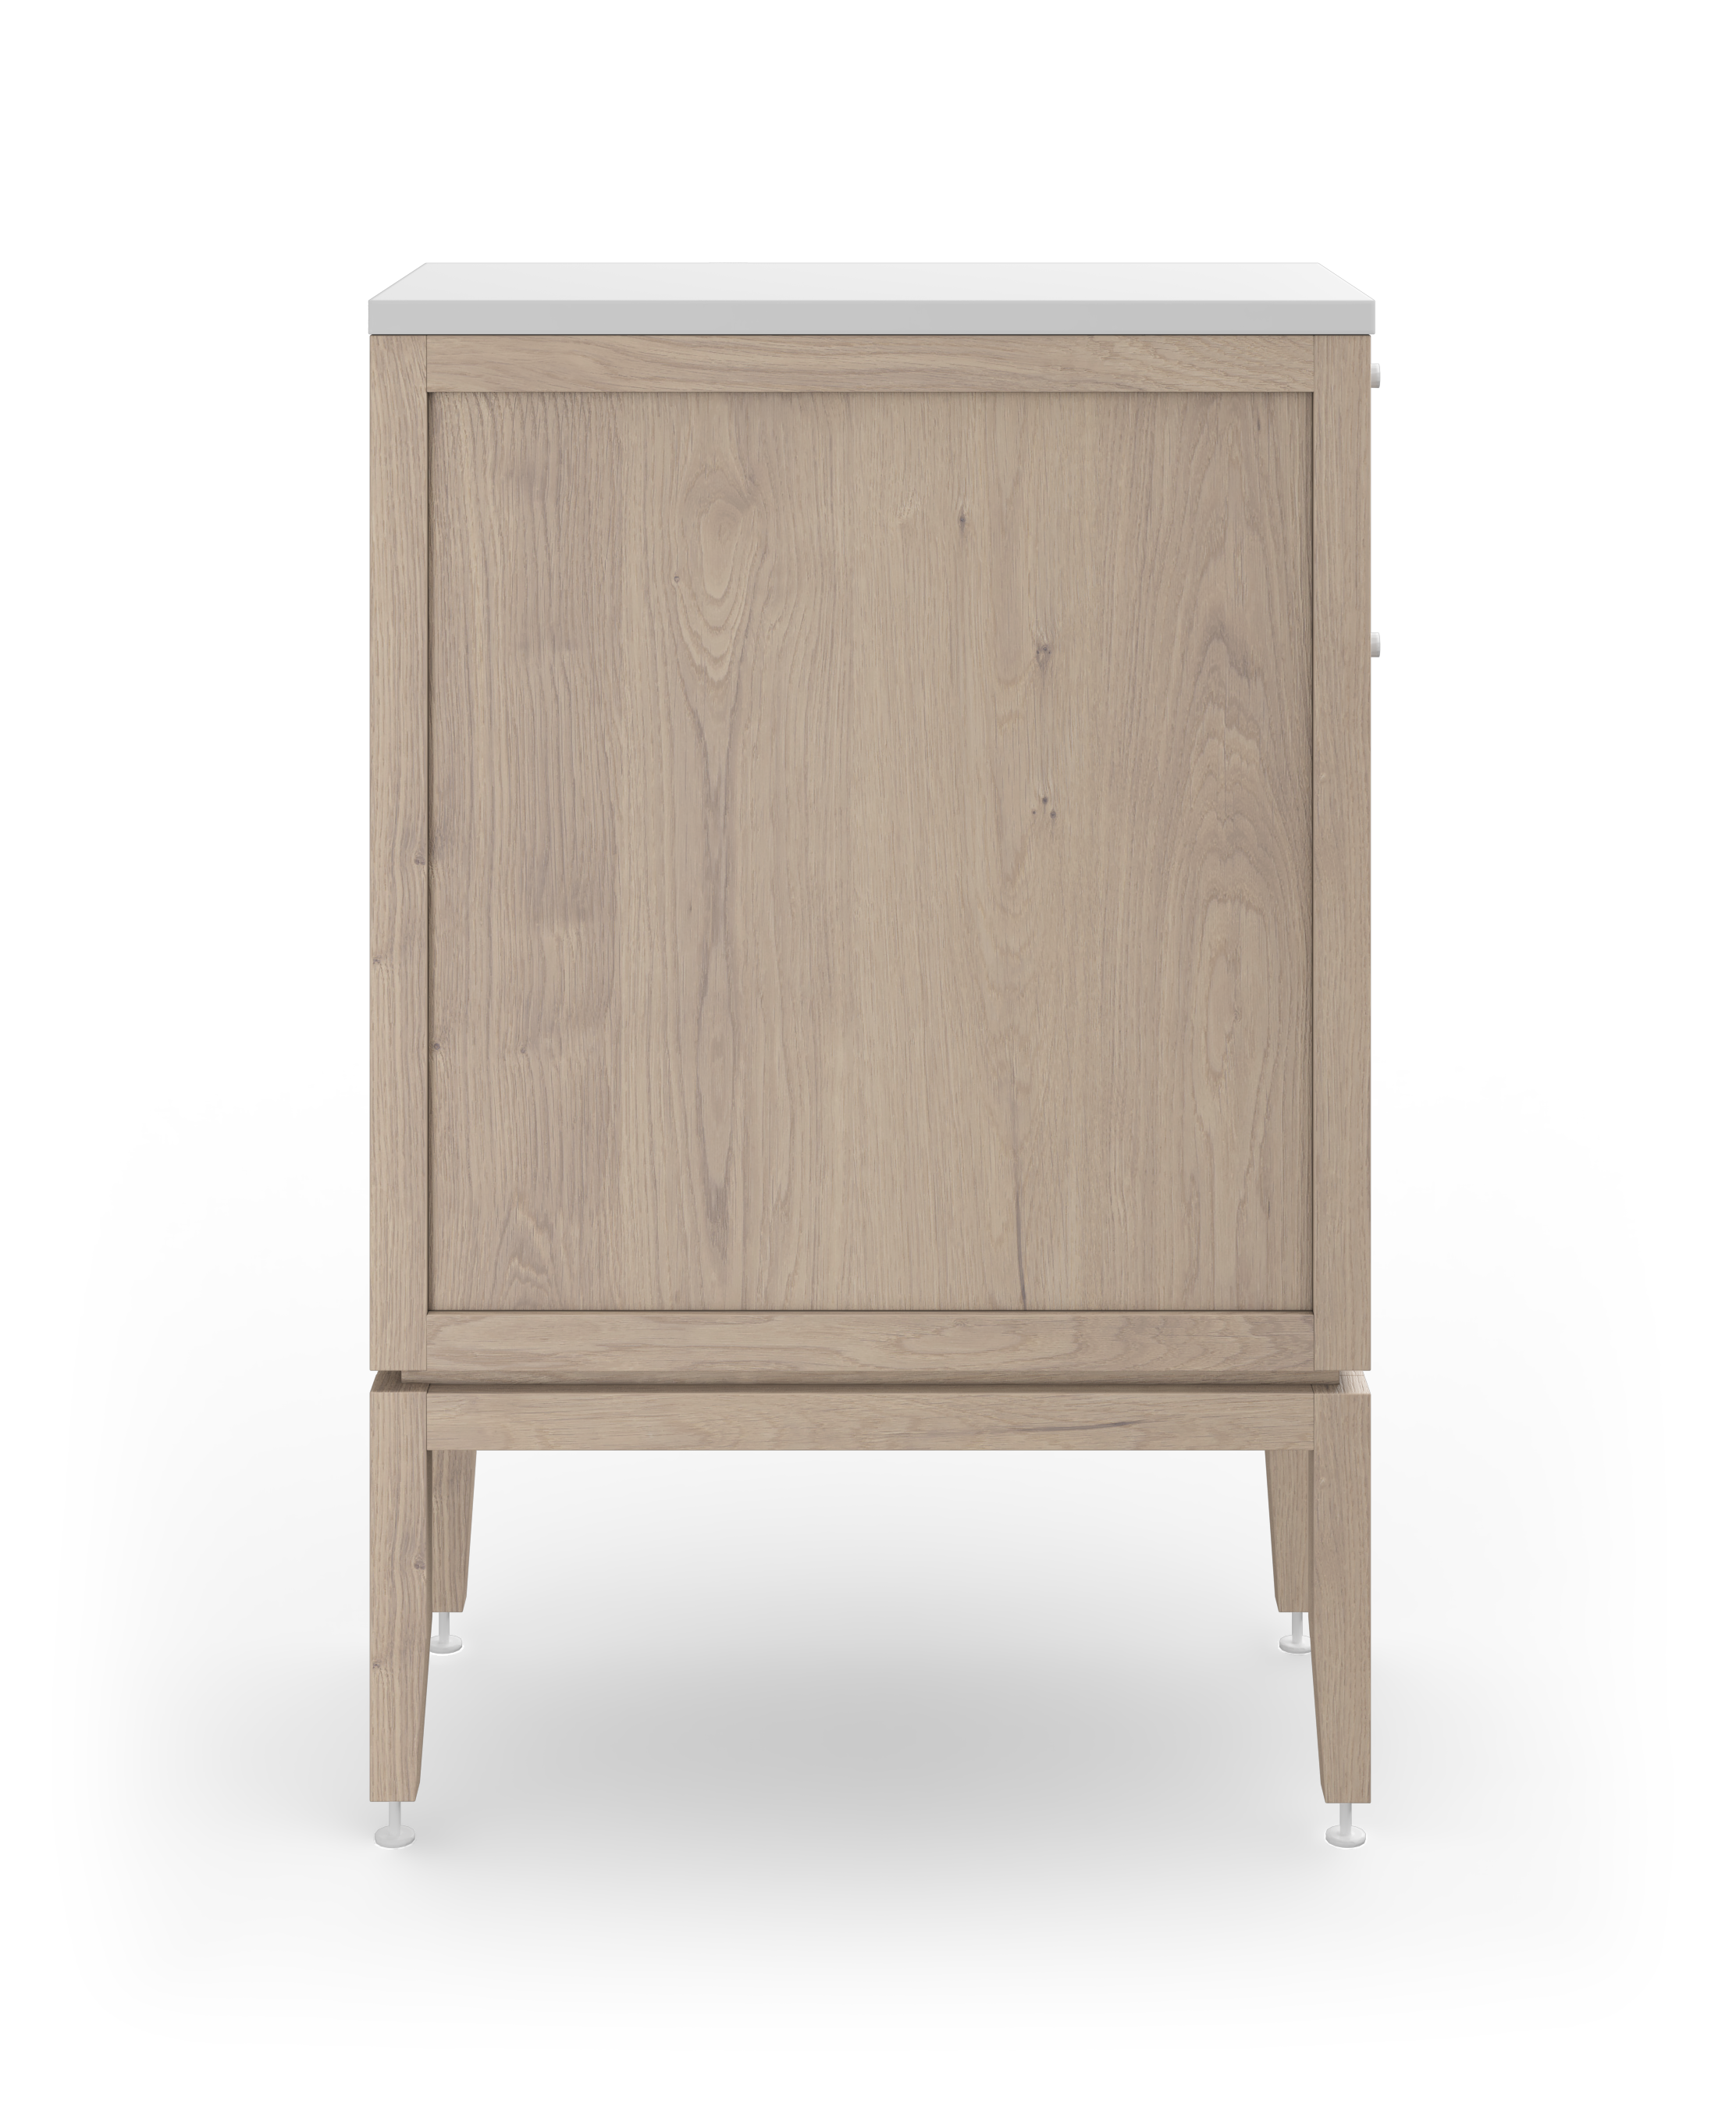 Coquo modular bathroom vanity with one drawer + one door in white stained oak. 